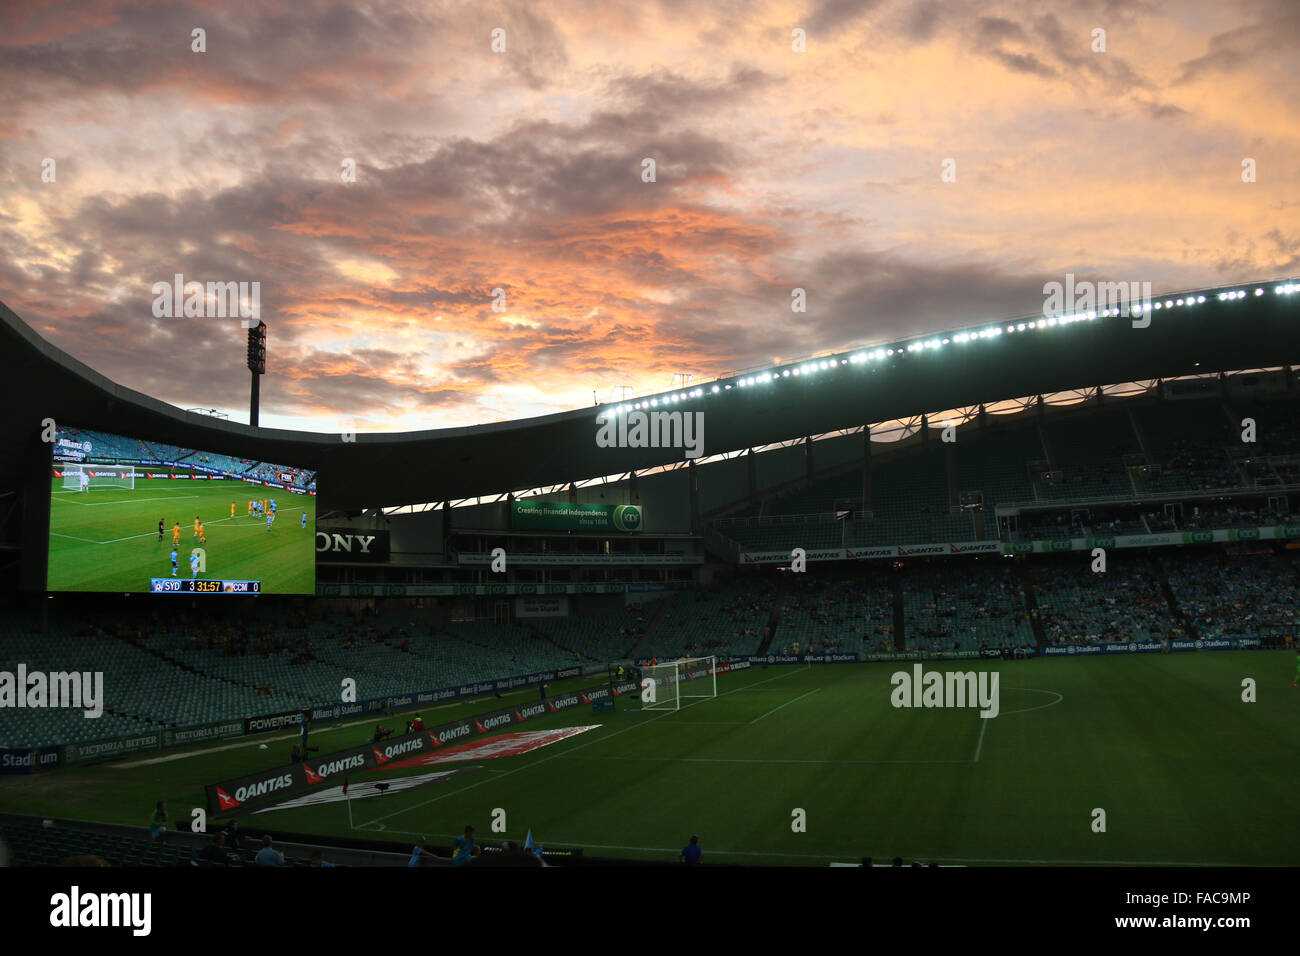 Sydney FC defeated Central Coast Mariners by four goals to one in the round 12 A-League match at Allianz Stadium, Moore Park. Stock Photo